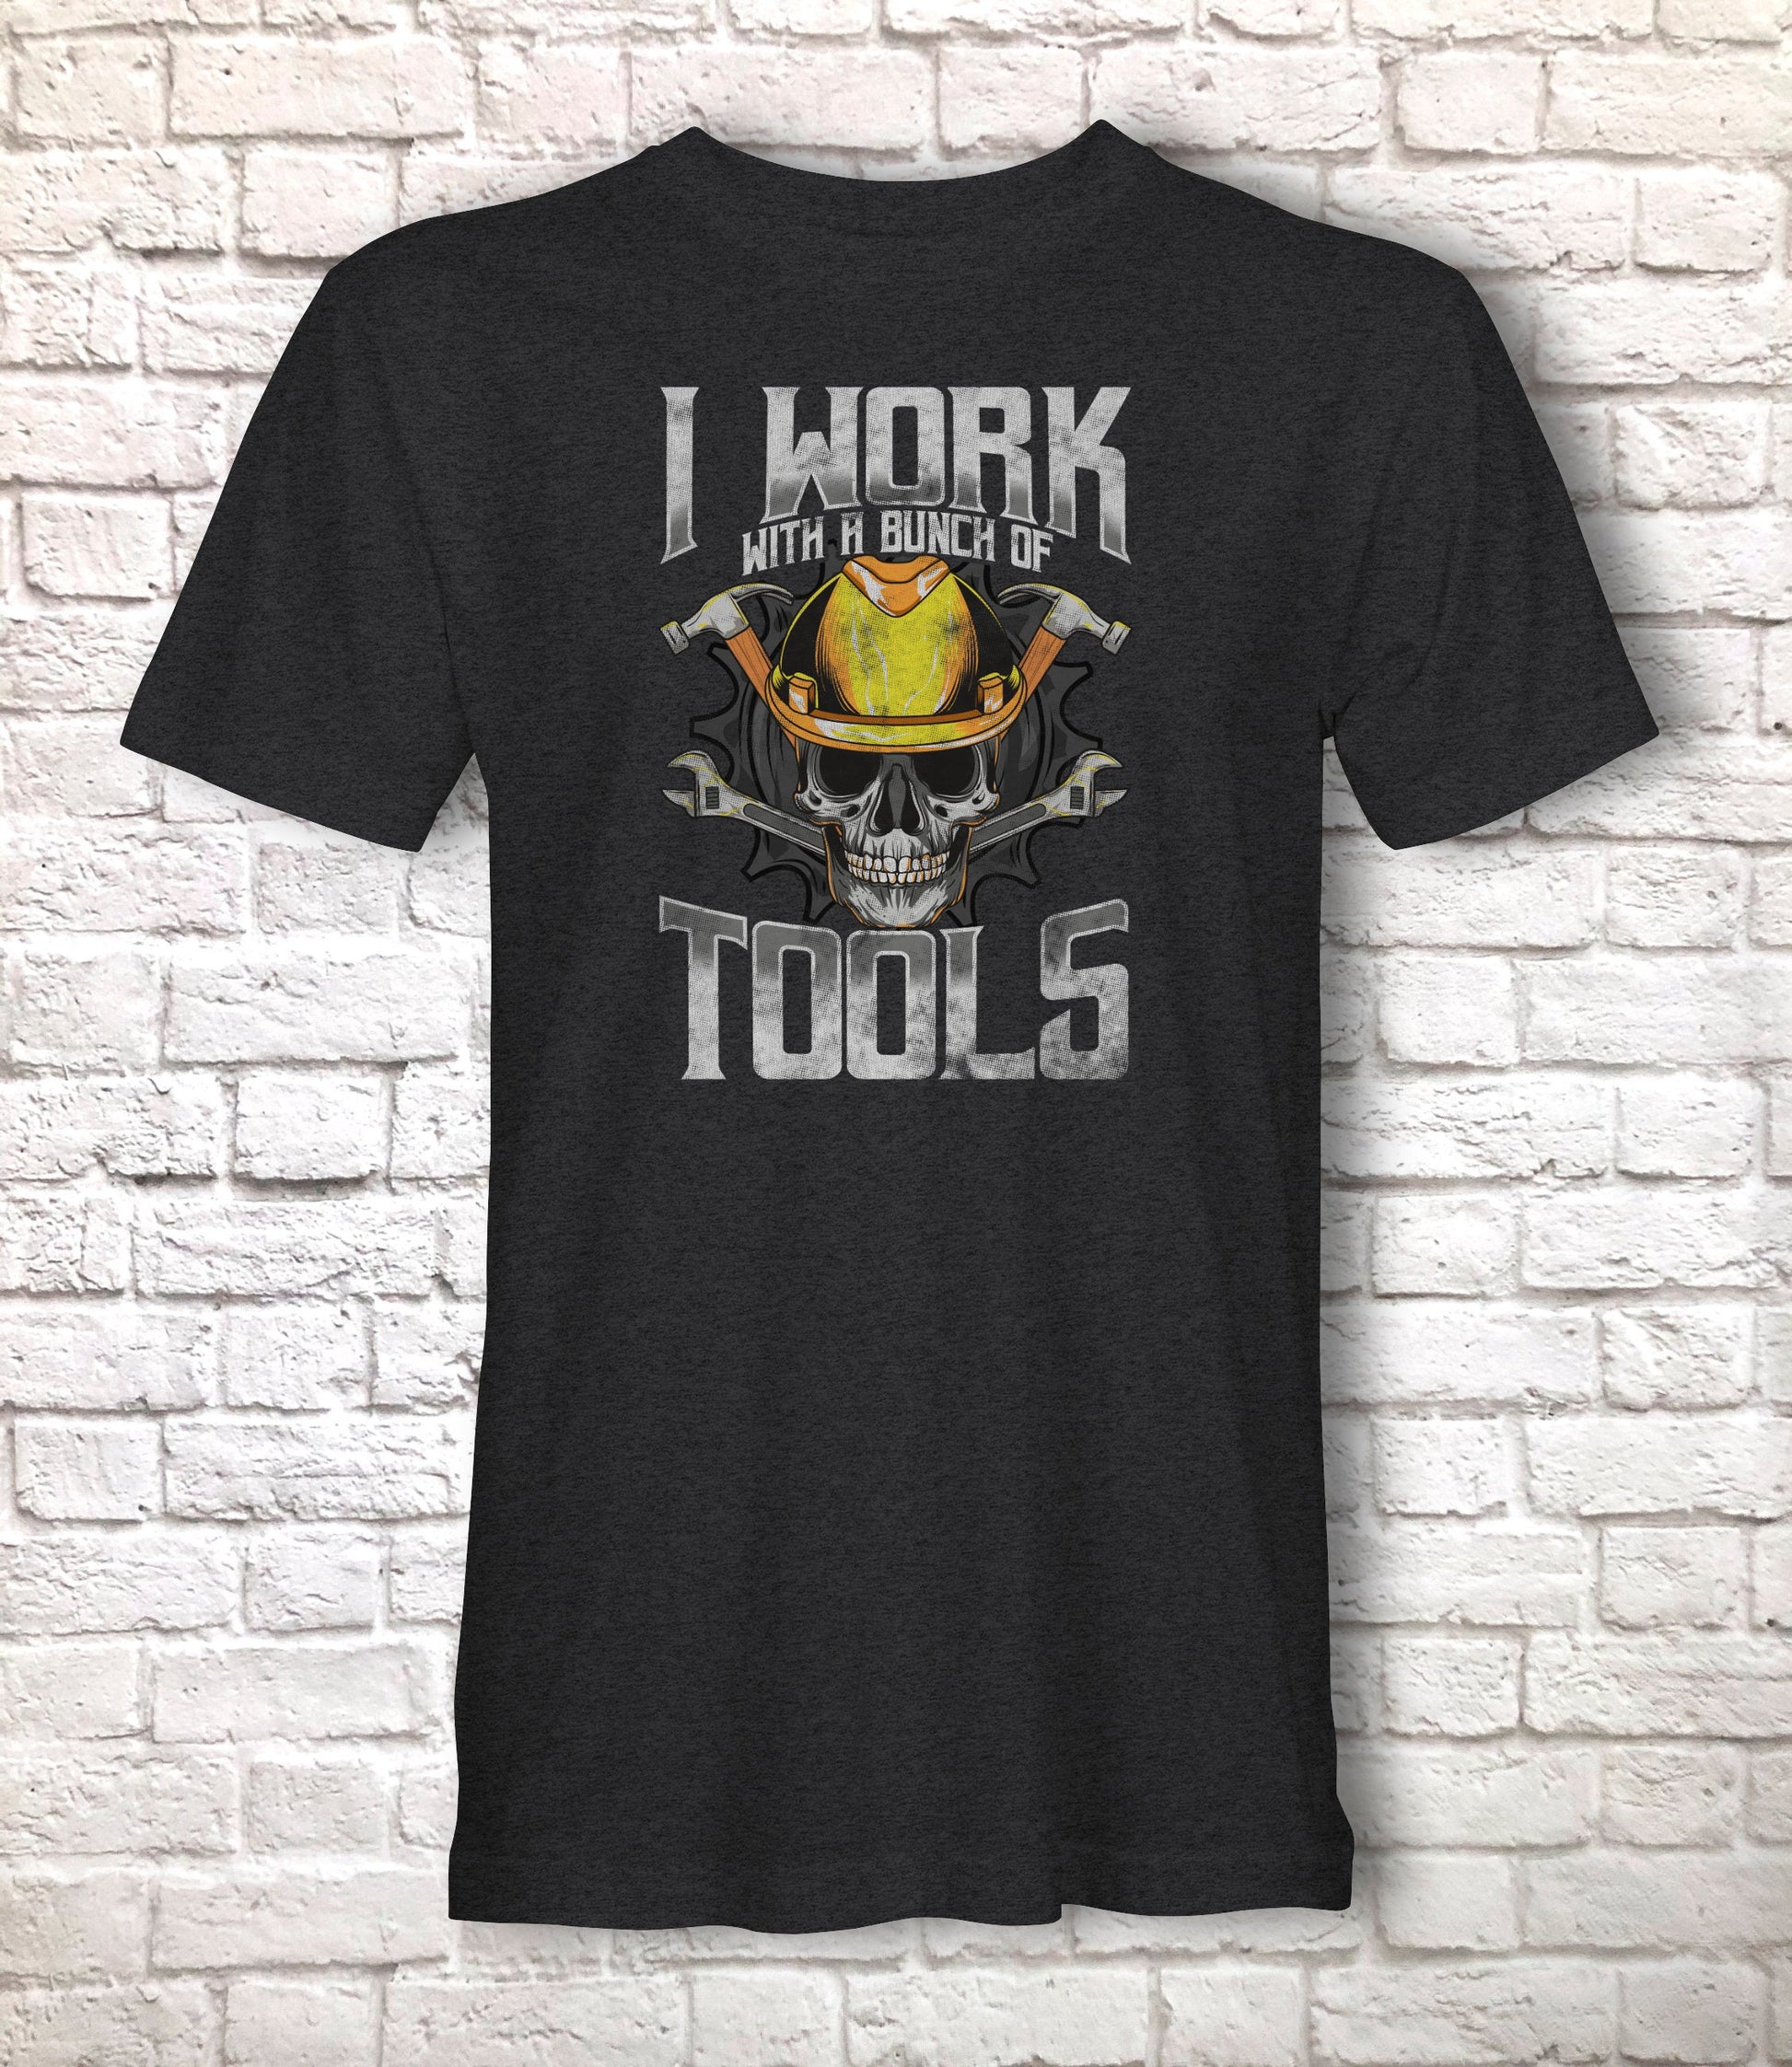 Funny Carpenter T-Shirt, I Work With A Bunch Of Tools Pun Gift Idea, Humorous Manual Worker Woodwork Graphic Tee Top